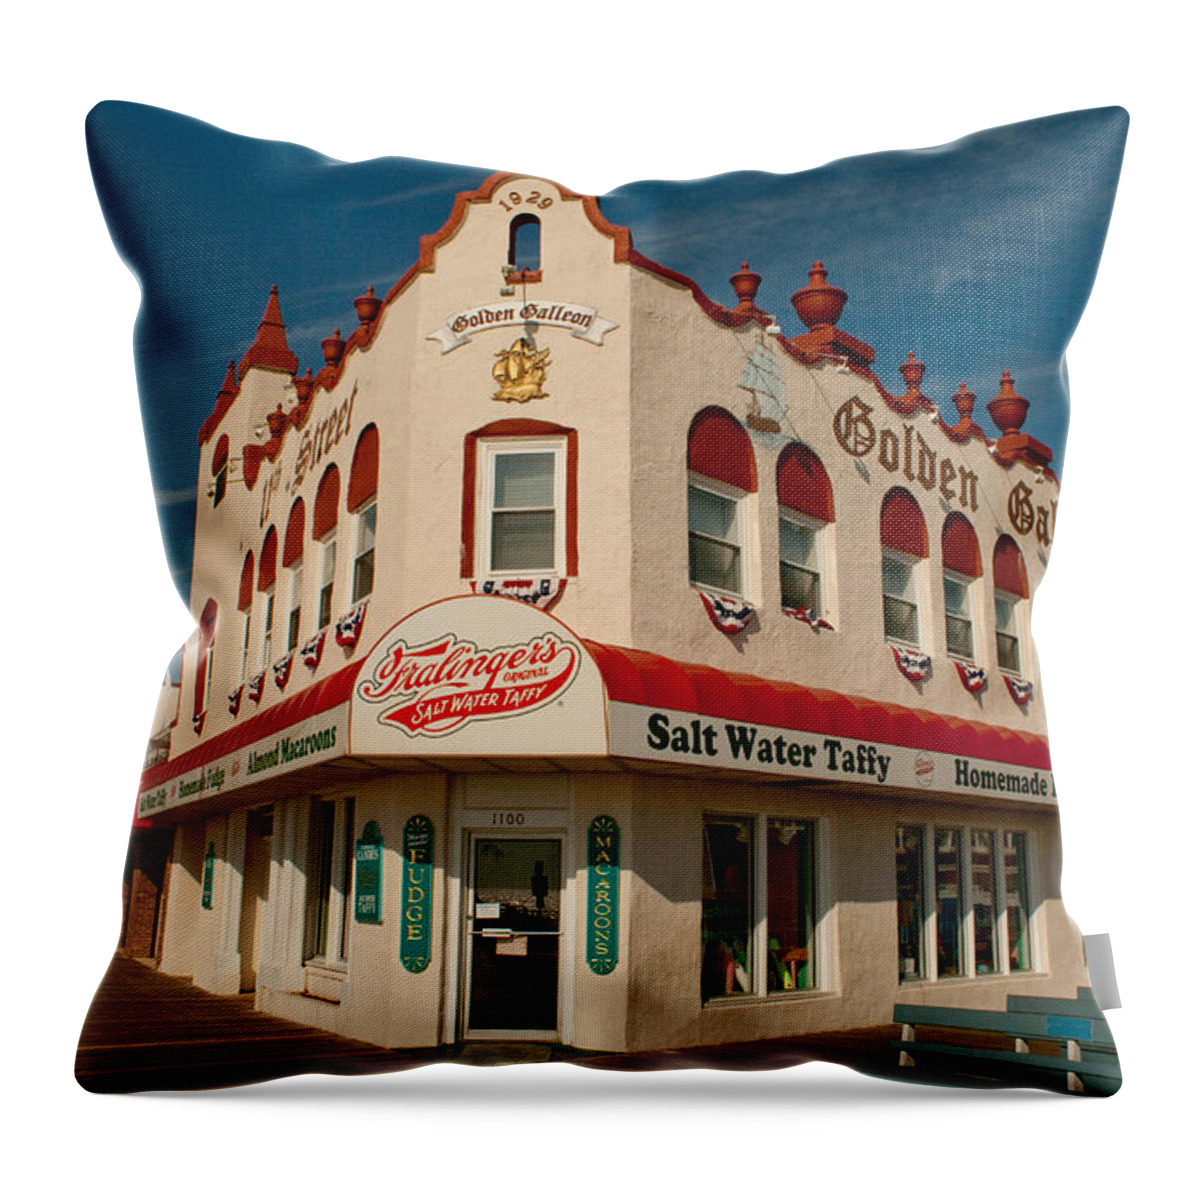 Ocean City Throw Pillow featuring the photograph Fralinger's - Golden Galleon by Kristia Adams